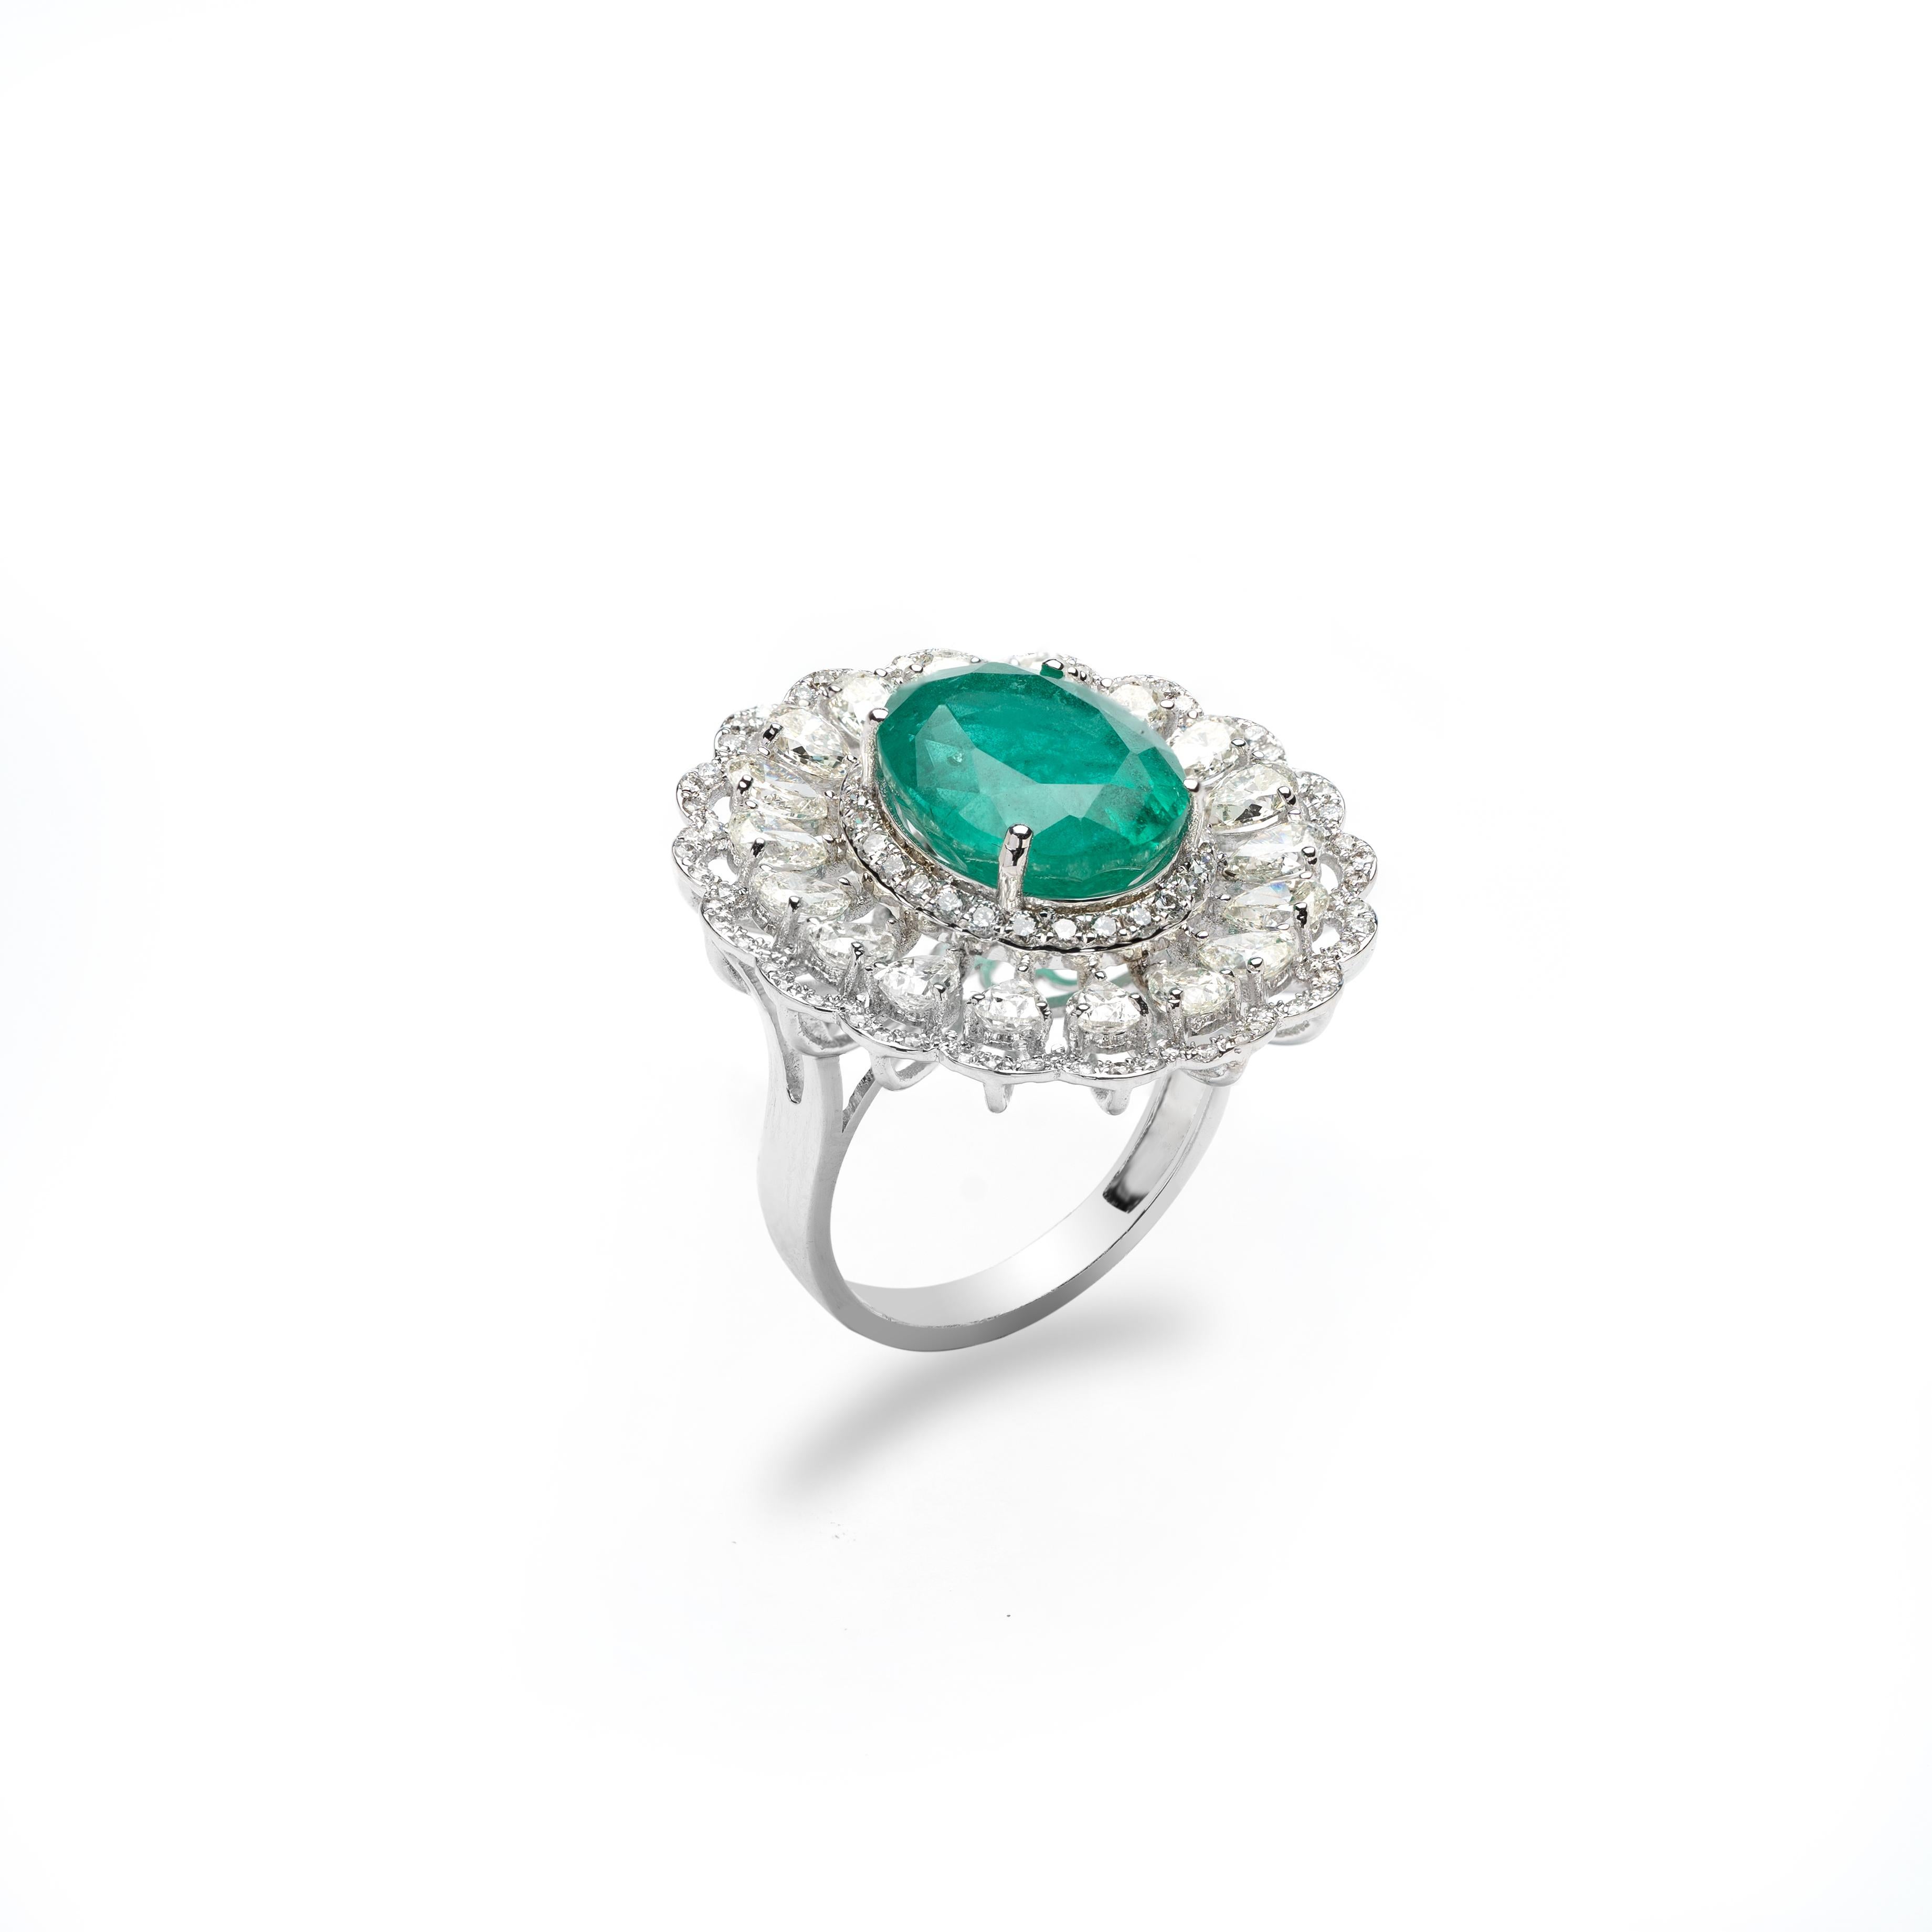 
Natural Zambian Emerald ring

 6.30 Carats of emeralds  
 3.11 Carats  of Diamonds

Emeralds are of very high quality. It's a brand new piece.

It’s very hard to capture the true color and luster of the stone, I have tried to add pictures which are